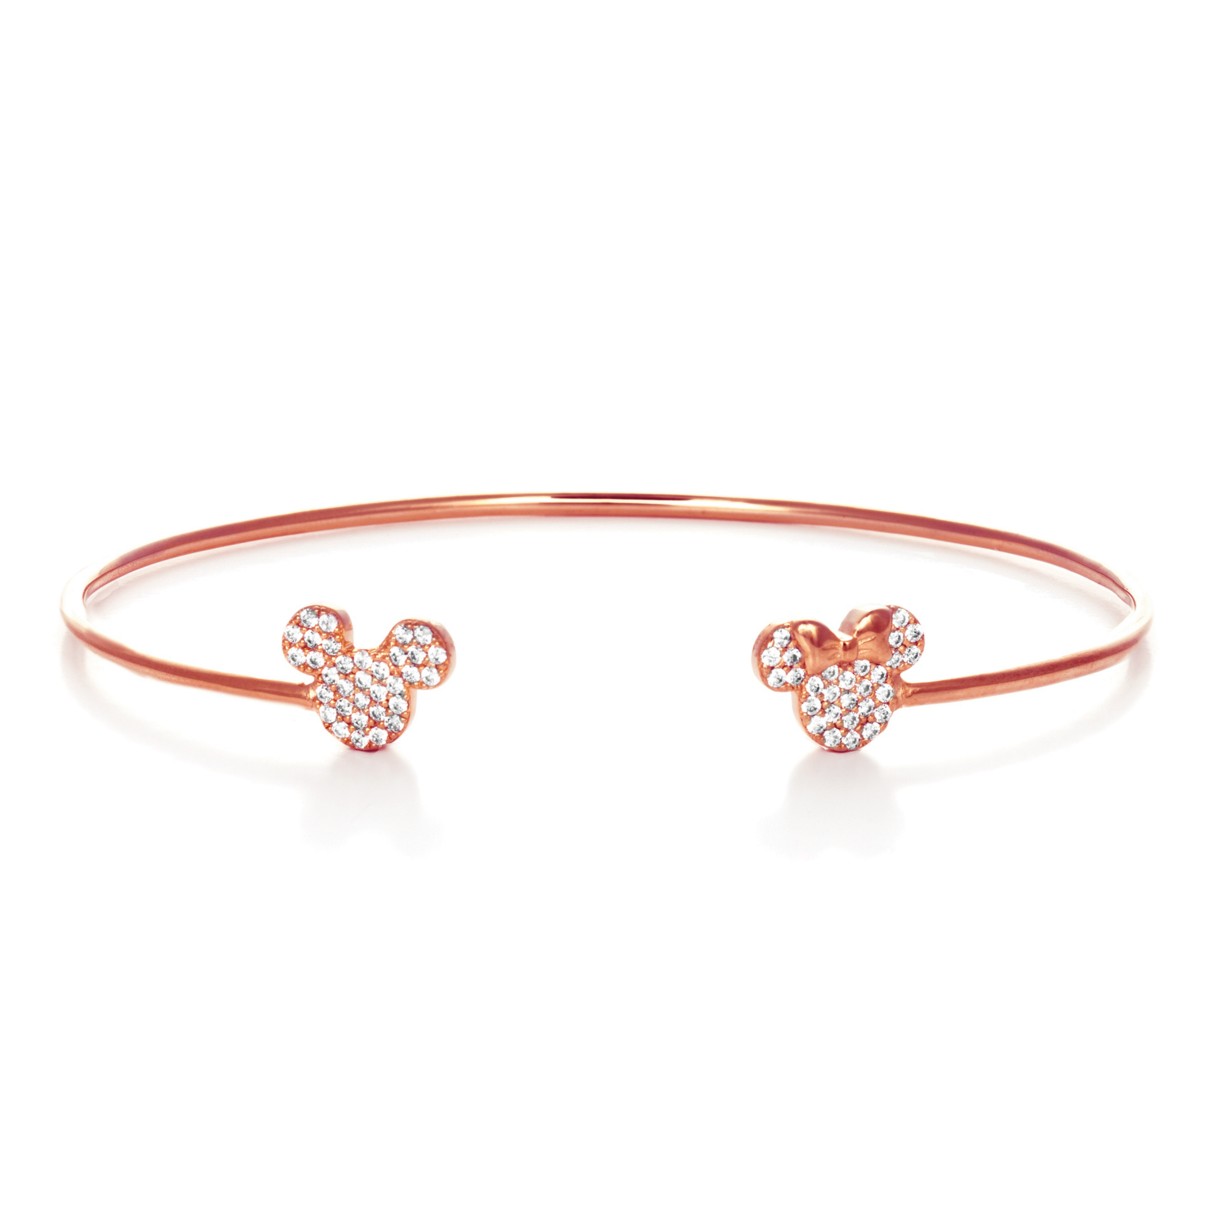 Mickey and Minnie Mouse Cuff Bracelet by CRISLU – Rose Gold